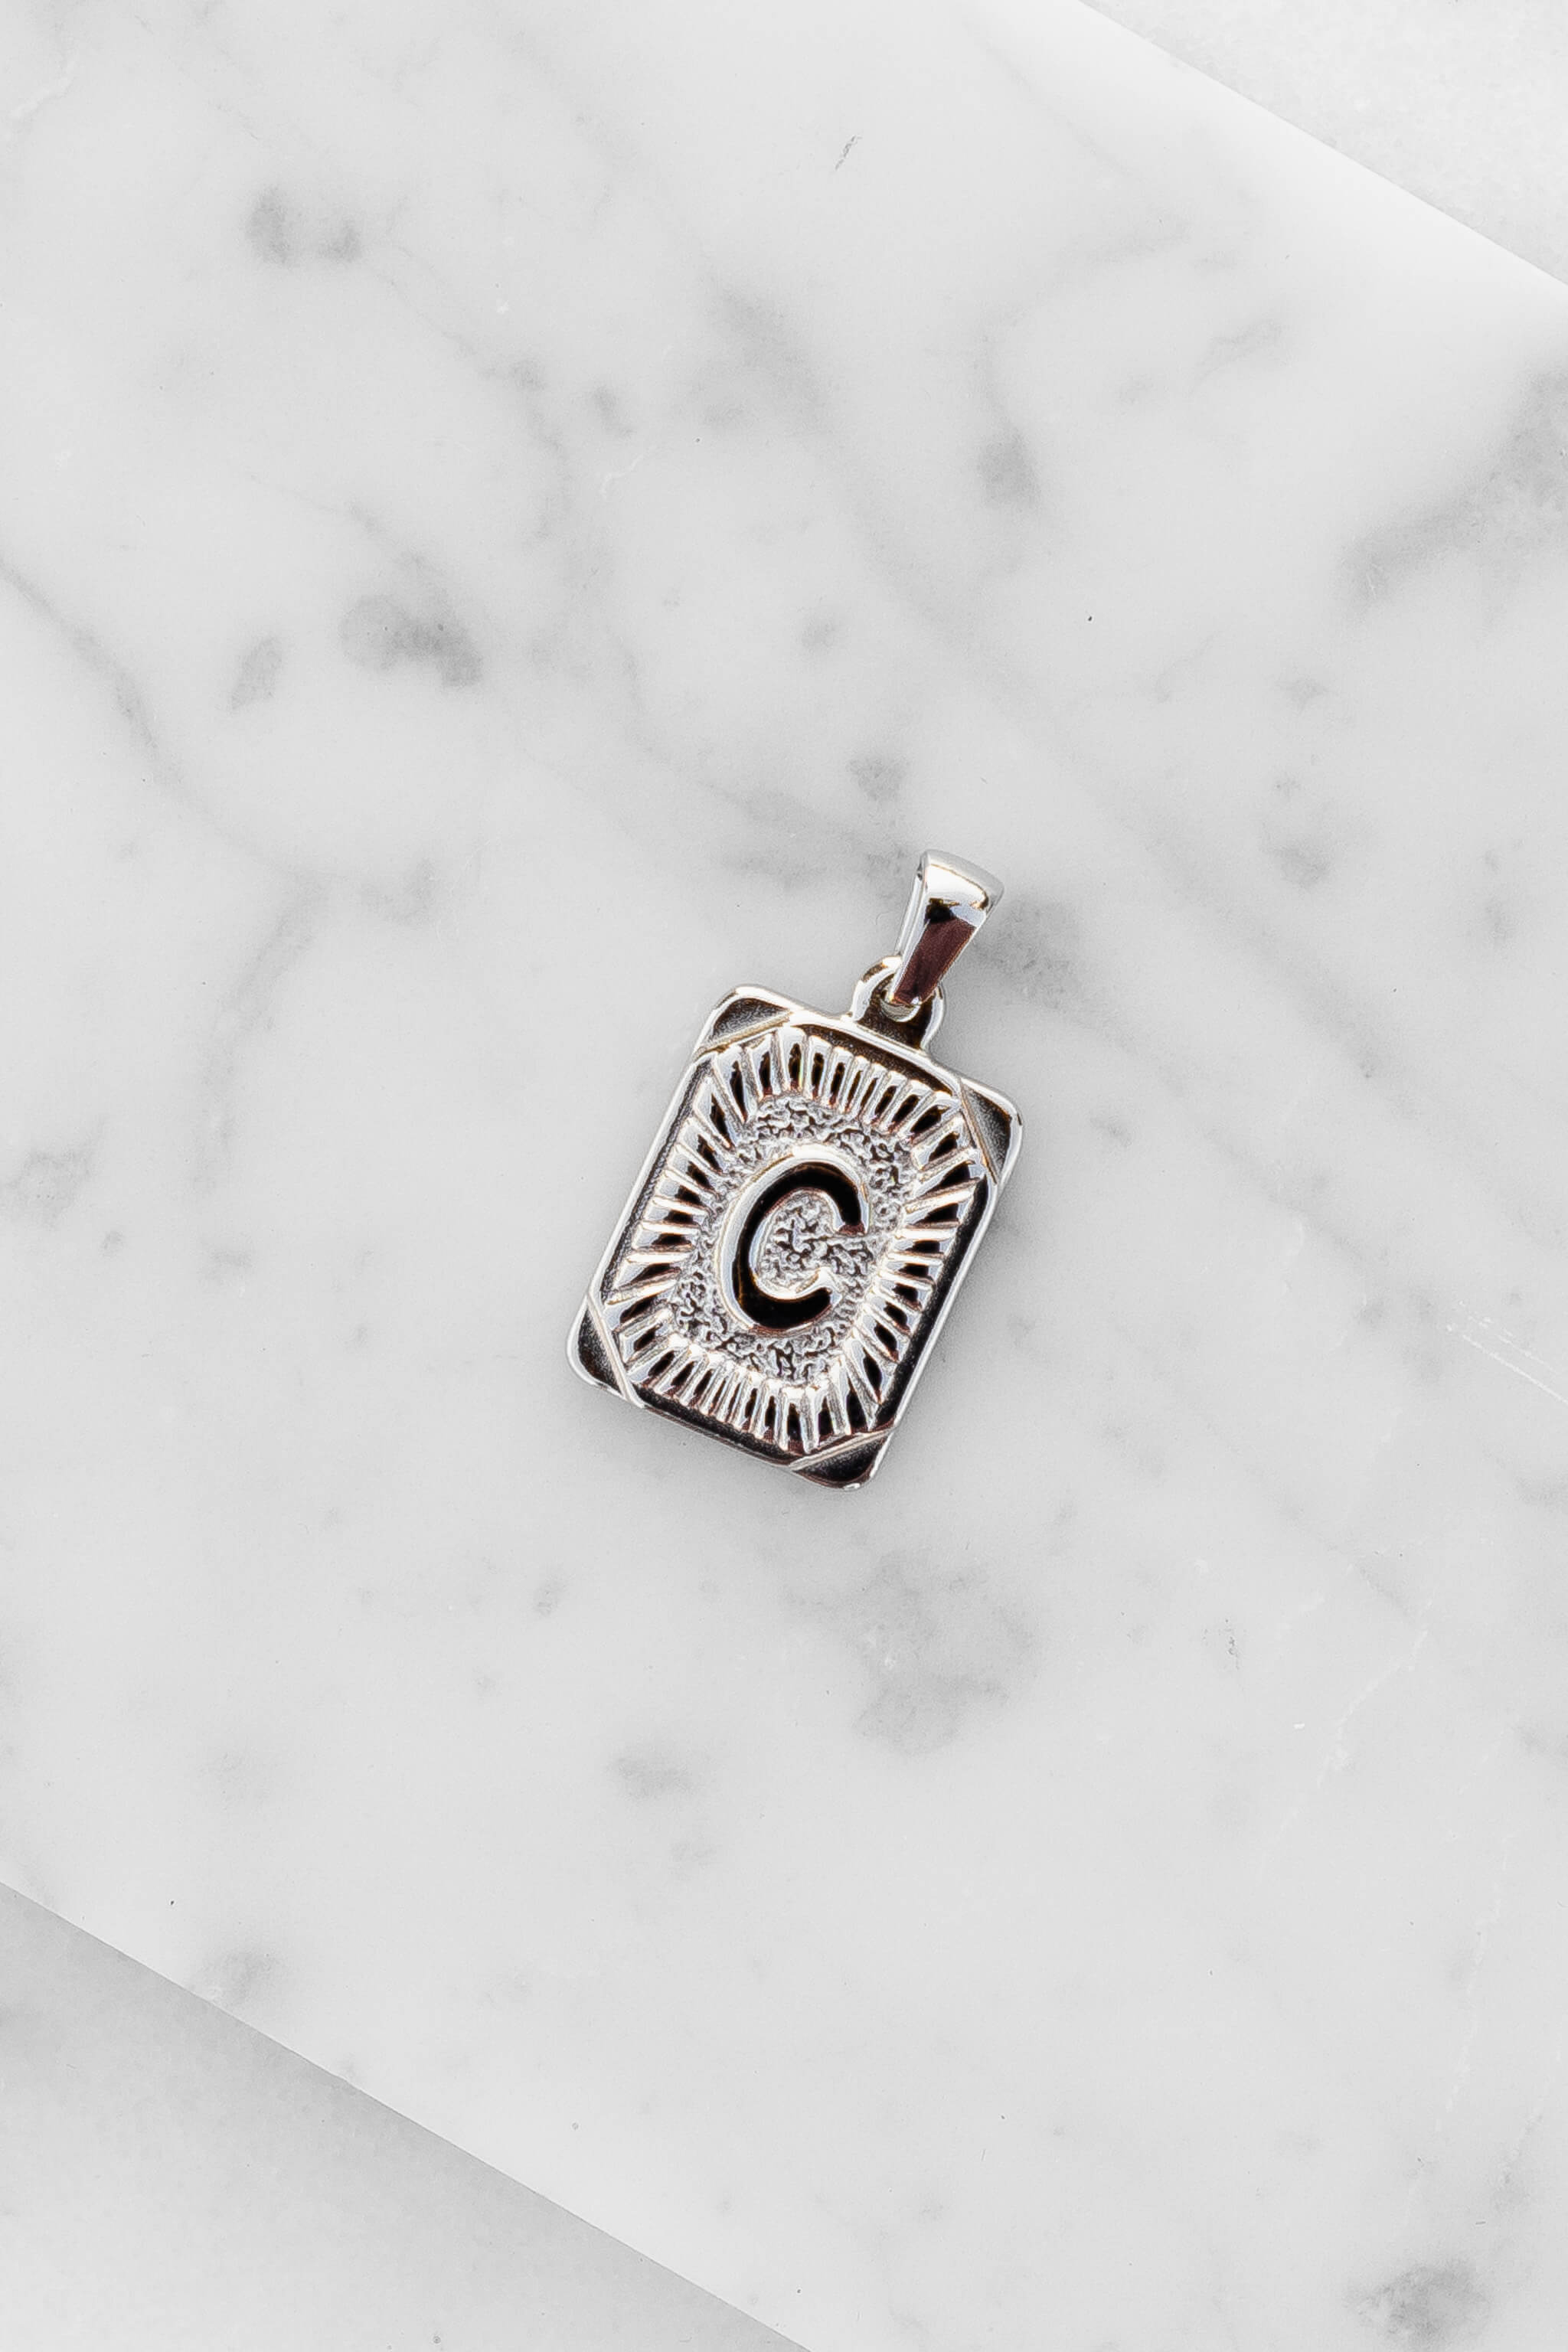 Silver Monogram Letter "C" Charm laying on a marble